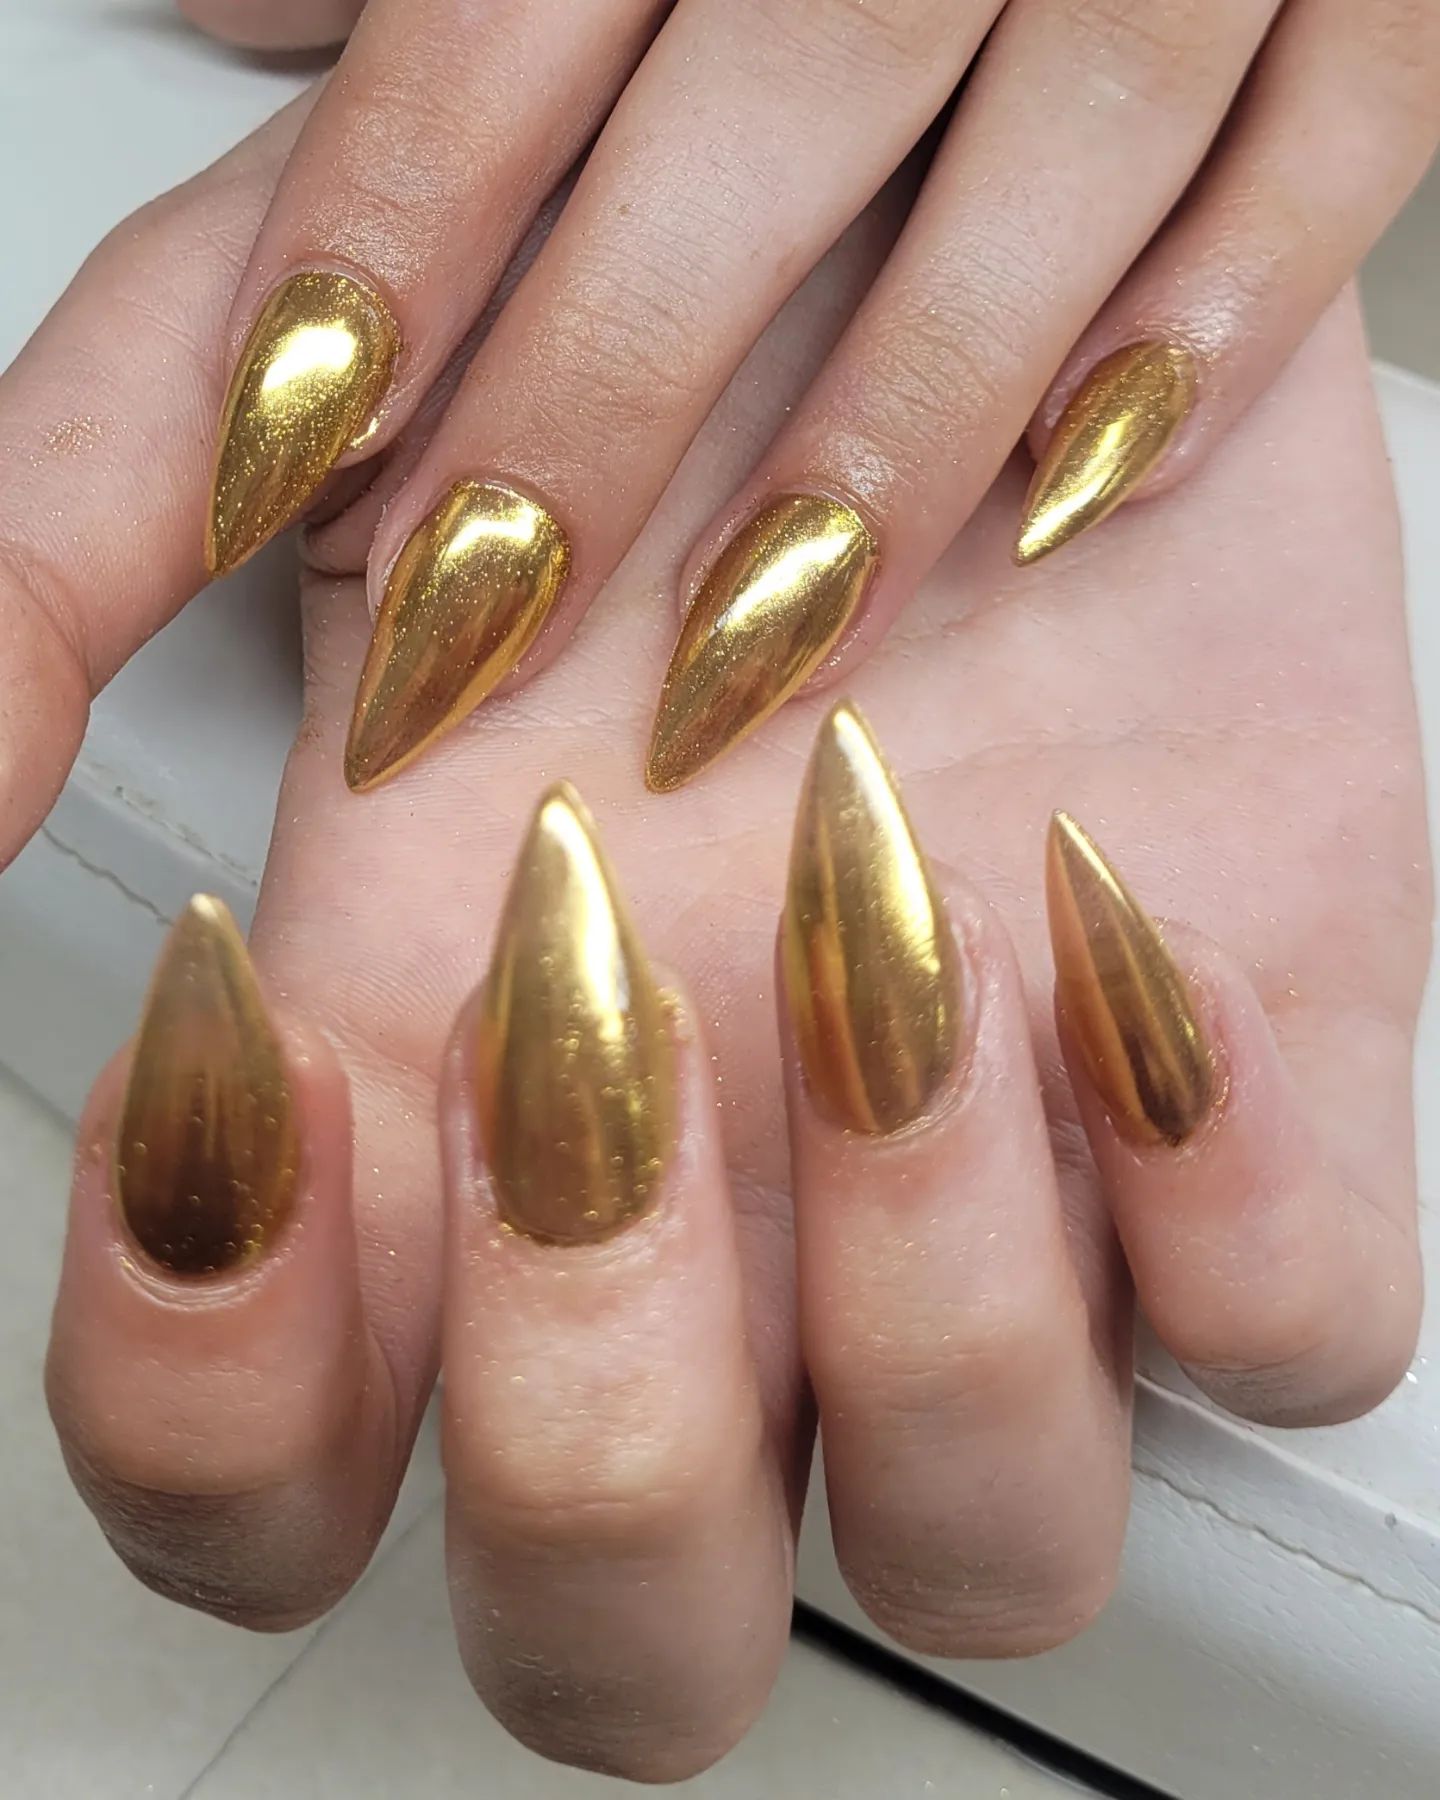 Gold provides a rich look, doesn't it? If you agree on that, apply this gold chrome nail polish for your next manicure.